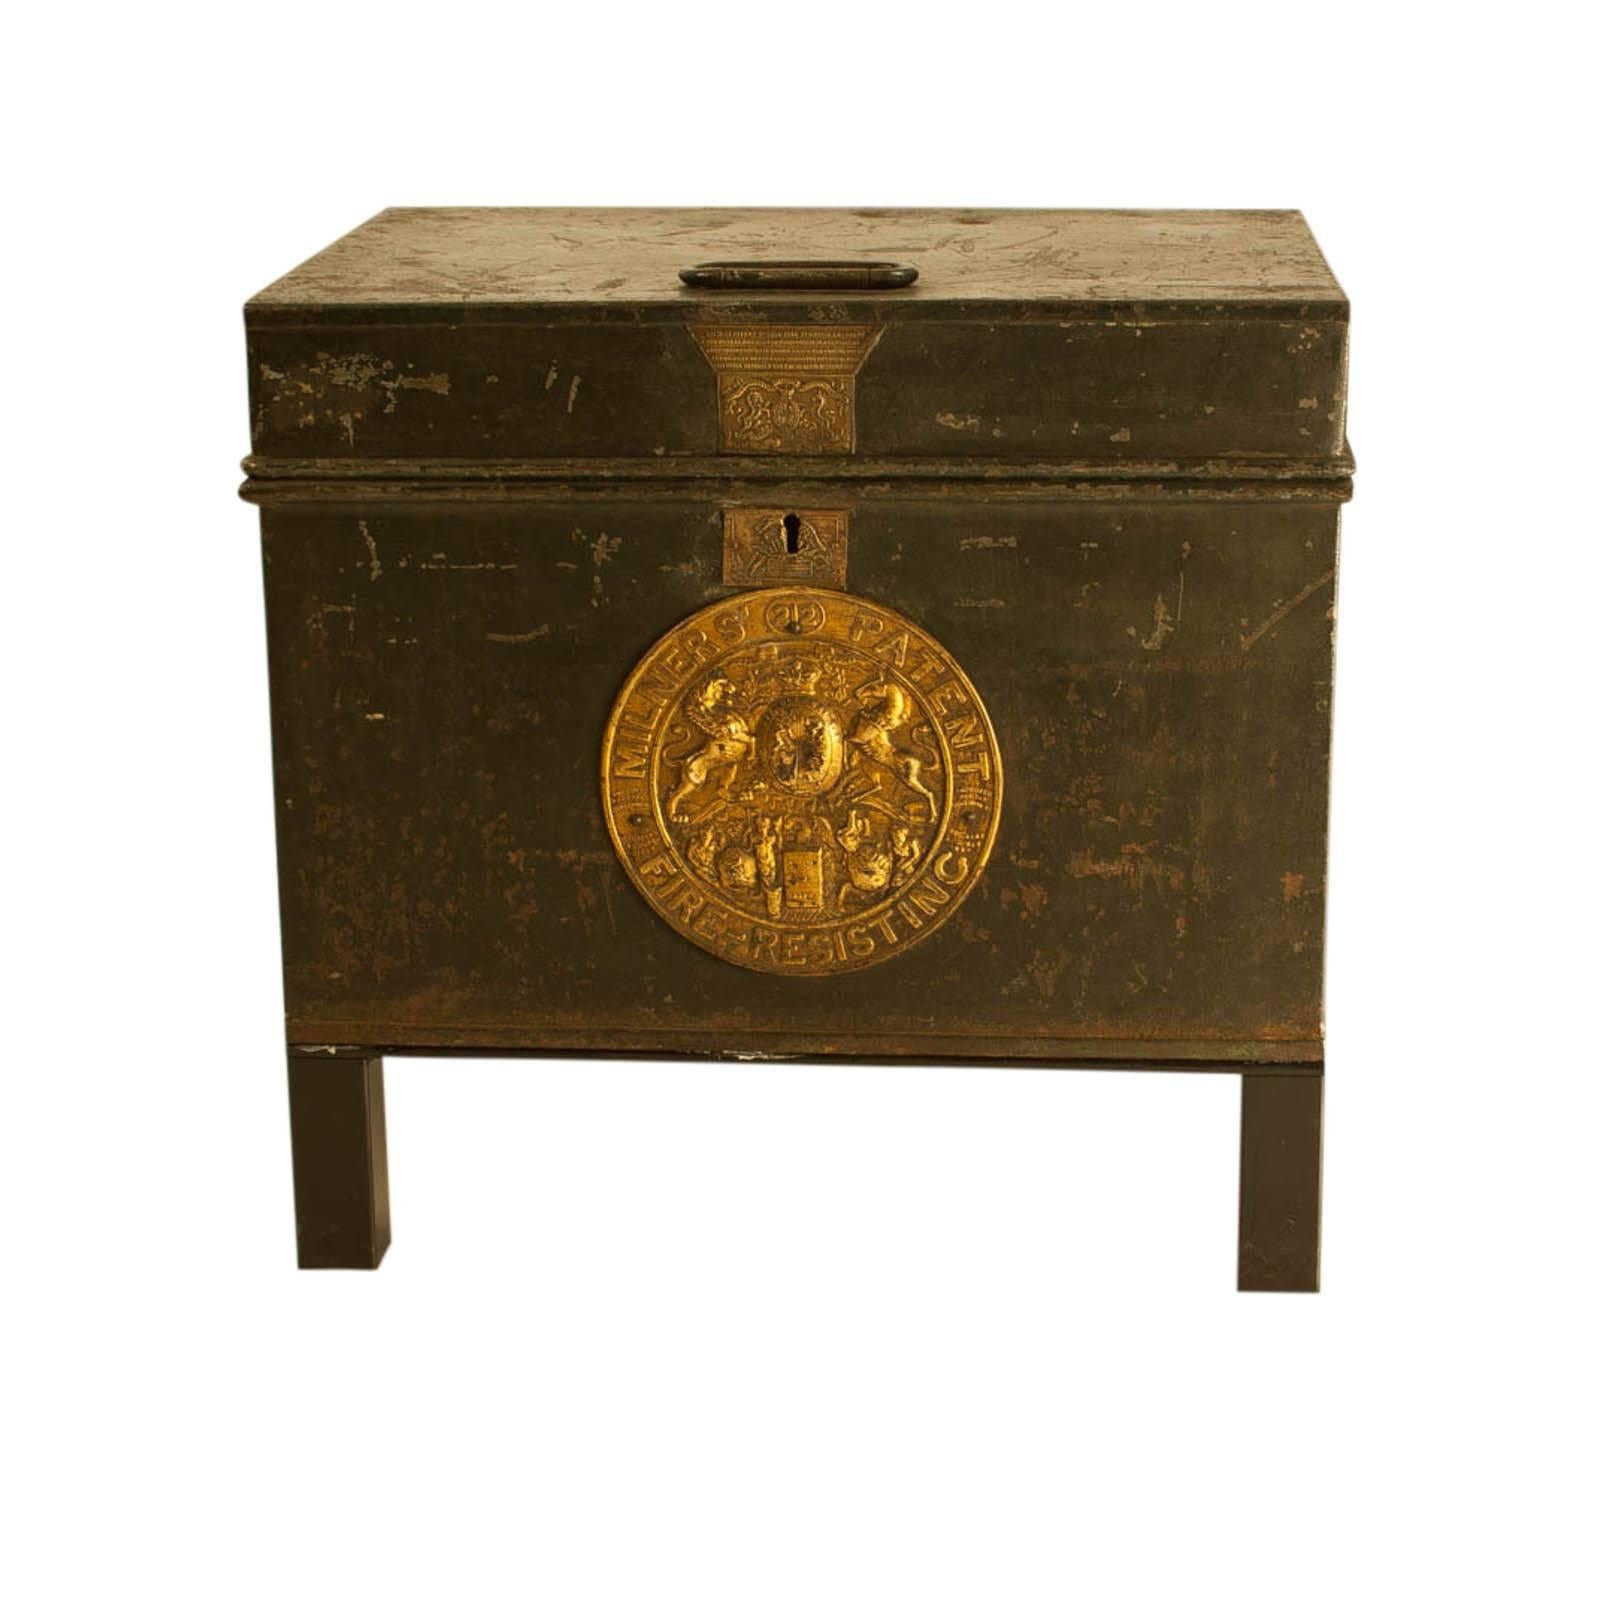 English Bottle Green painted metal fire safe with gilt brass  escutcheons and Royal Warrant, circa 1860.  Standing on custom iron stands.  The interior painted bright green with printed instructions.  We have another similar example.  